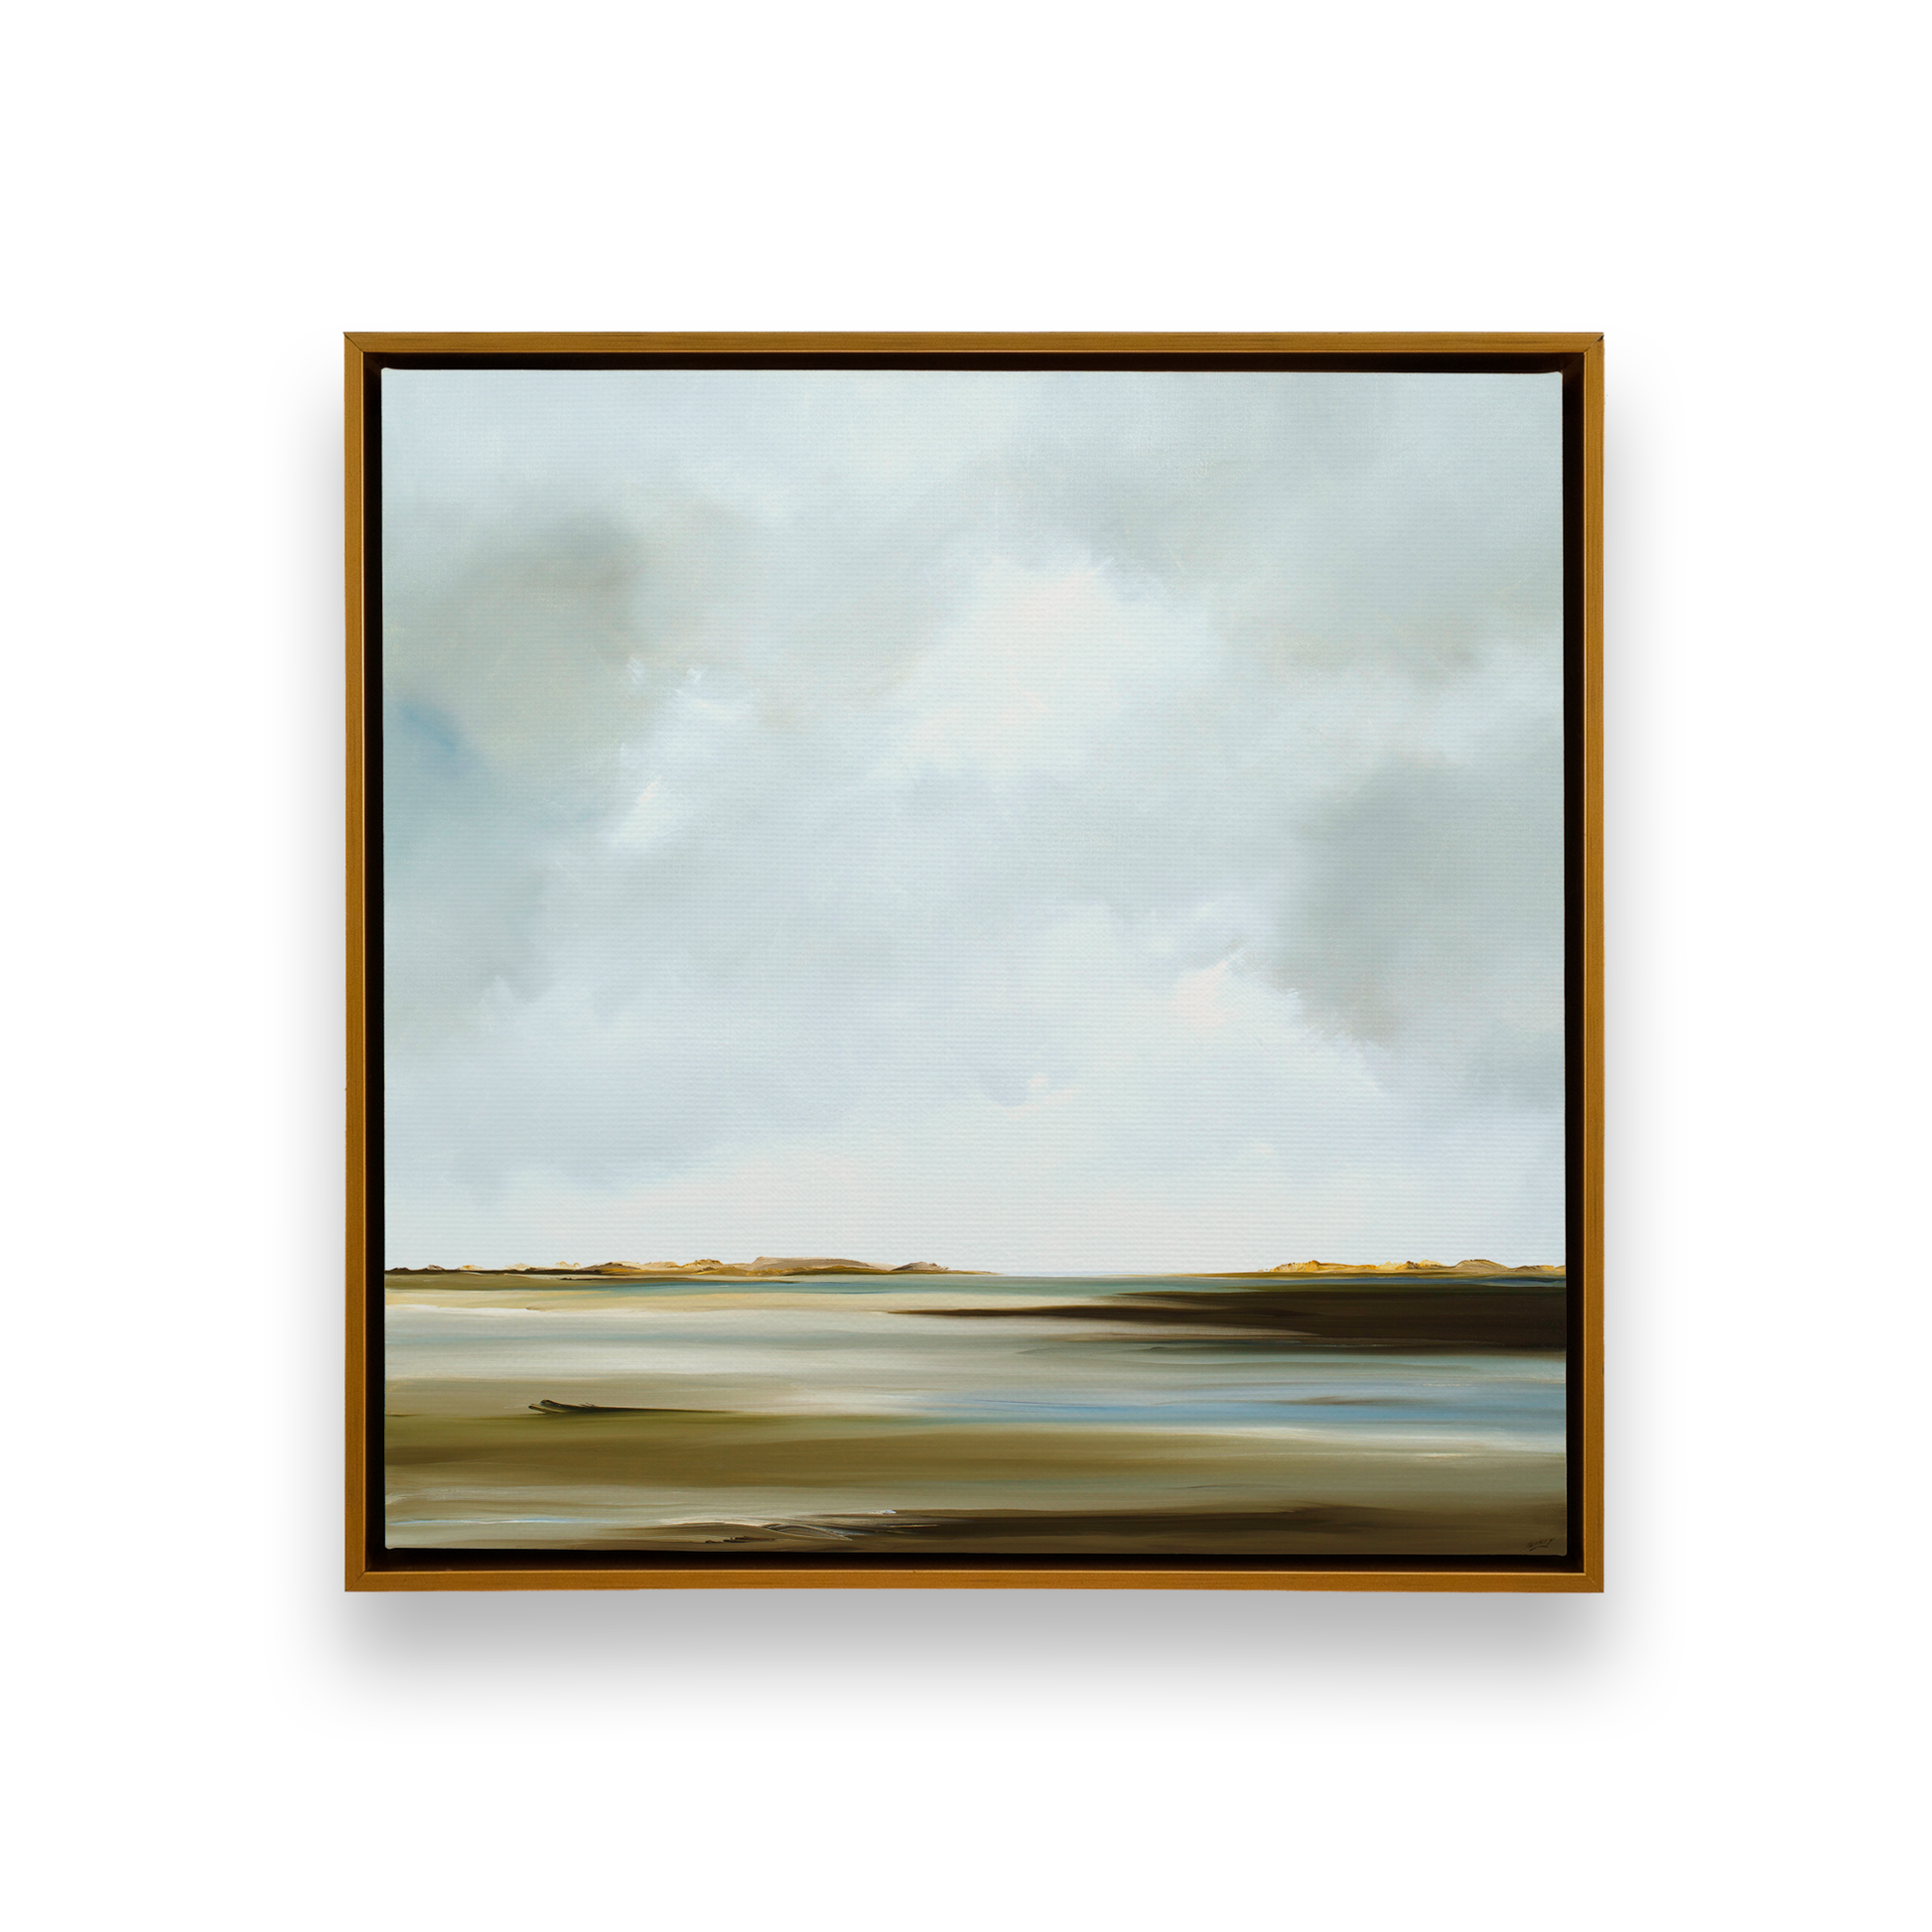 [color:Polished Gold],[shape:square], Picture of art in a black frame